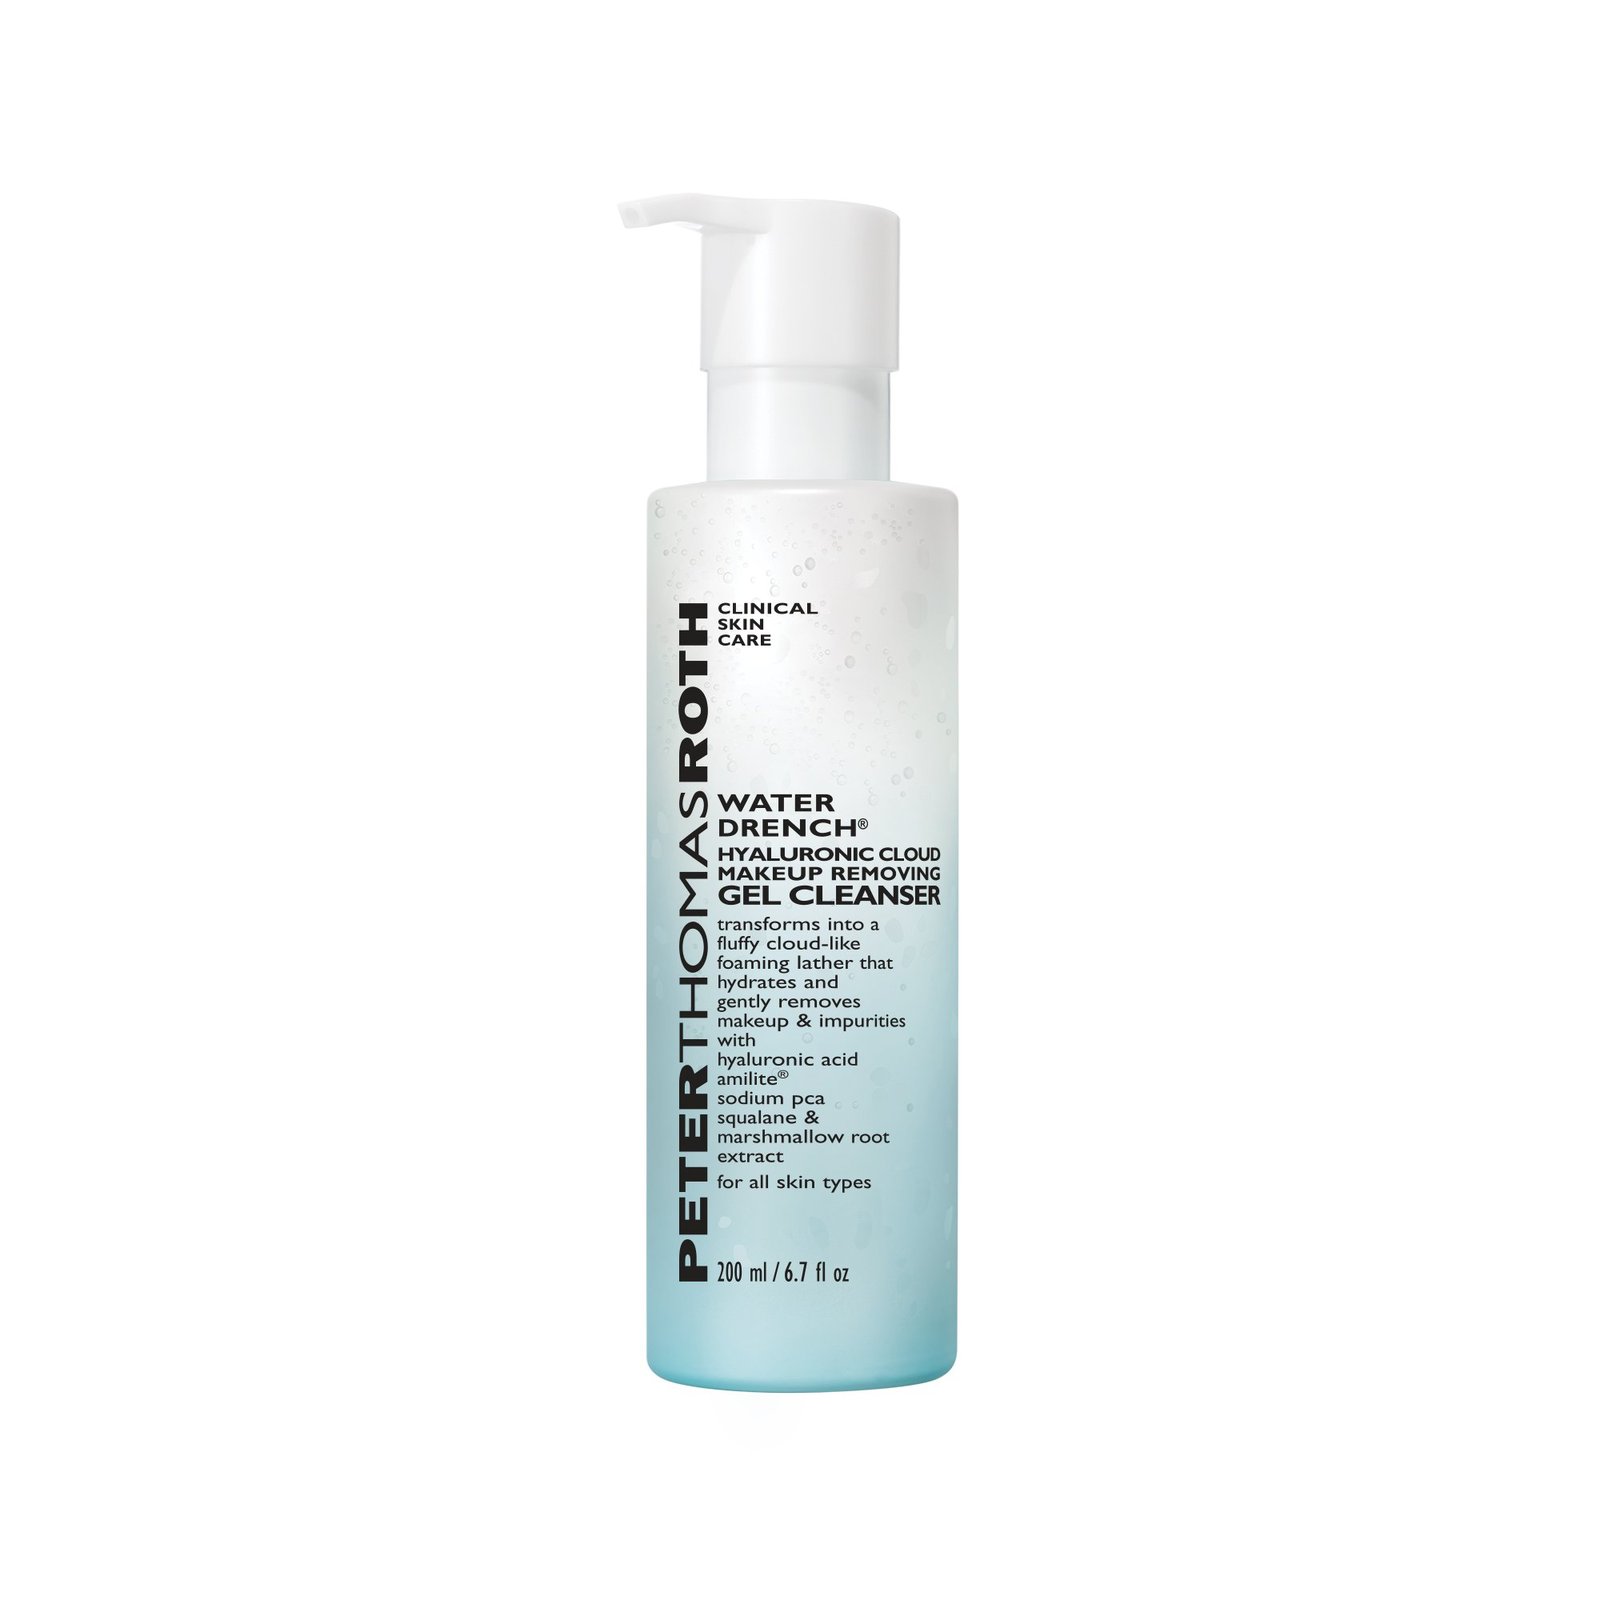 Peter Thomas Roth Water Drench® Hyaluronic Cloud Makeup Removing Gel Cleanser 200 ml